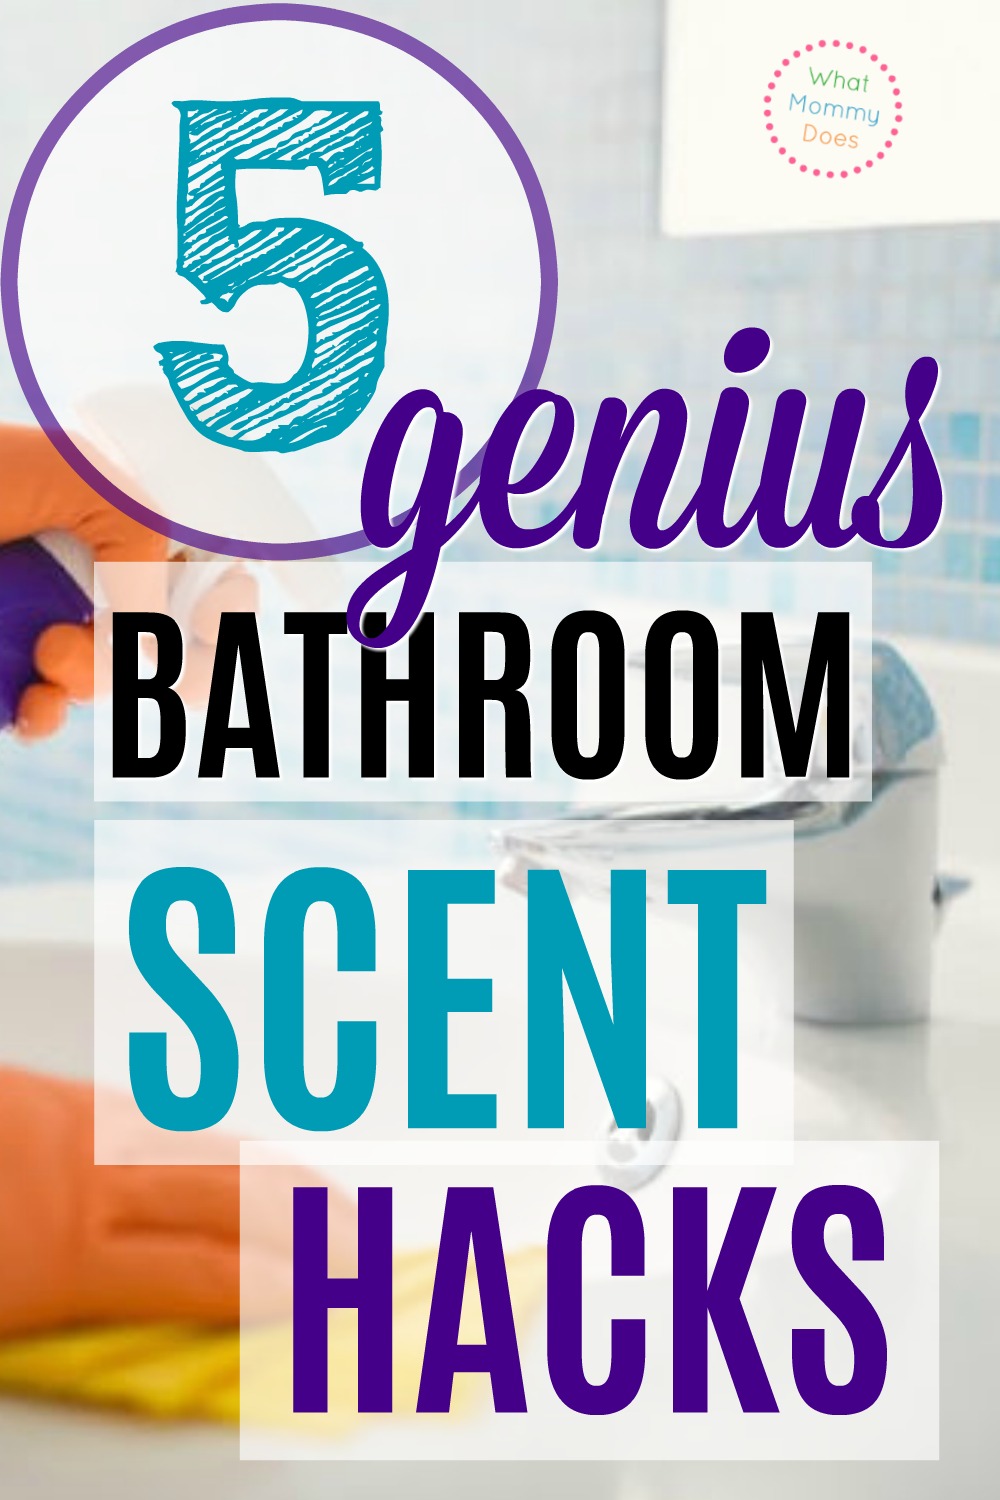 If you want your bathroom to smell fresh (even after someone poops!), you NEED to read this! This explains where you can get the exact BEST smelling fragrance diffuser for bathrooms, the best poop scent masking spray available, and natural cleaning tips! You WILL get rid of bad smells if you follow this checklist. 